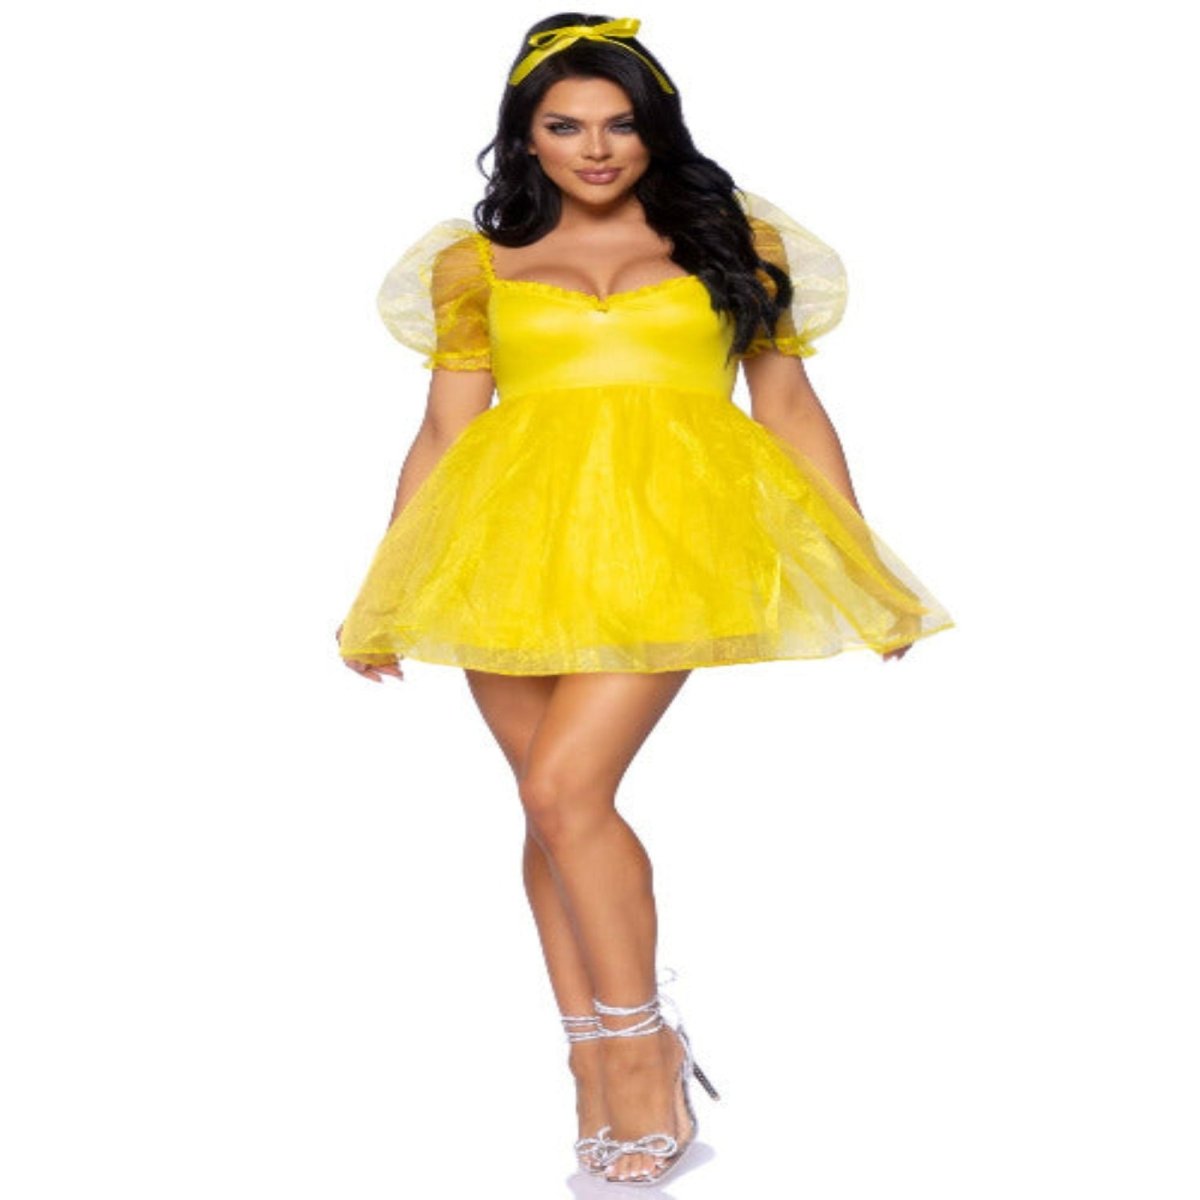 Frosted Organza Babydoll Dress With Ruffled Sweetheart Neckline And Puff Sleeves - worldclasscostumes